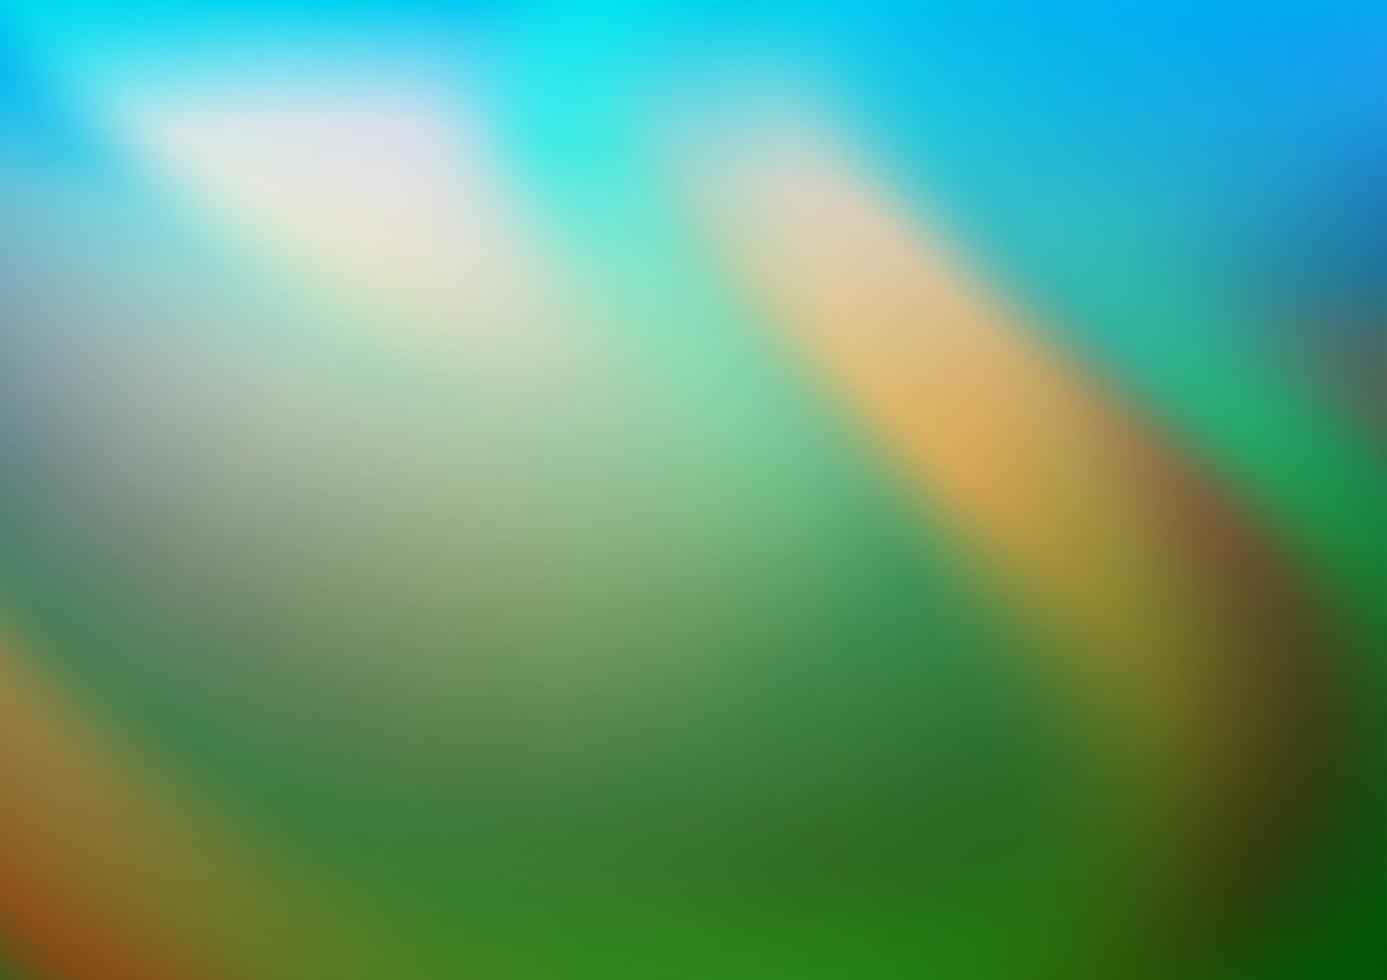 Dark Blue, Green vector abstract bright background.